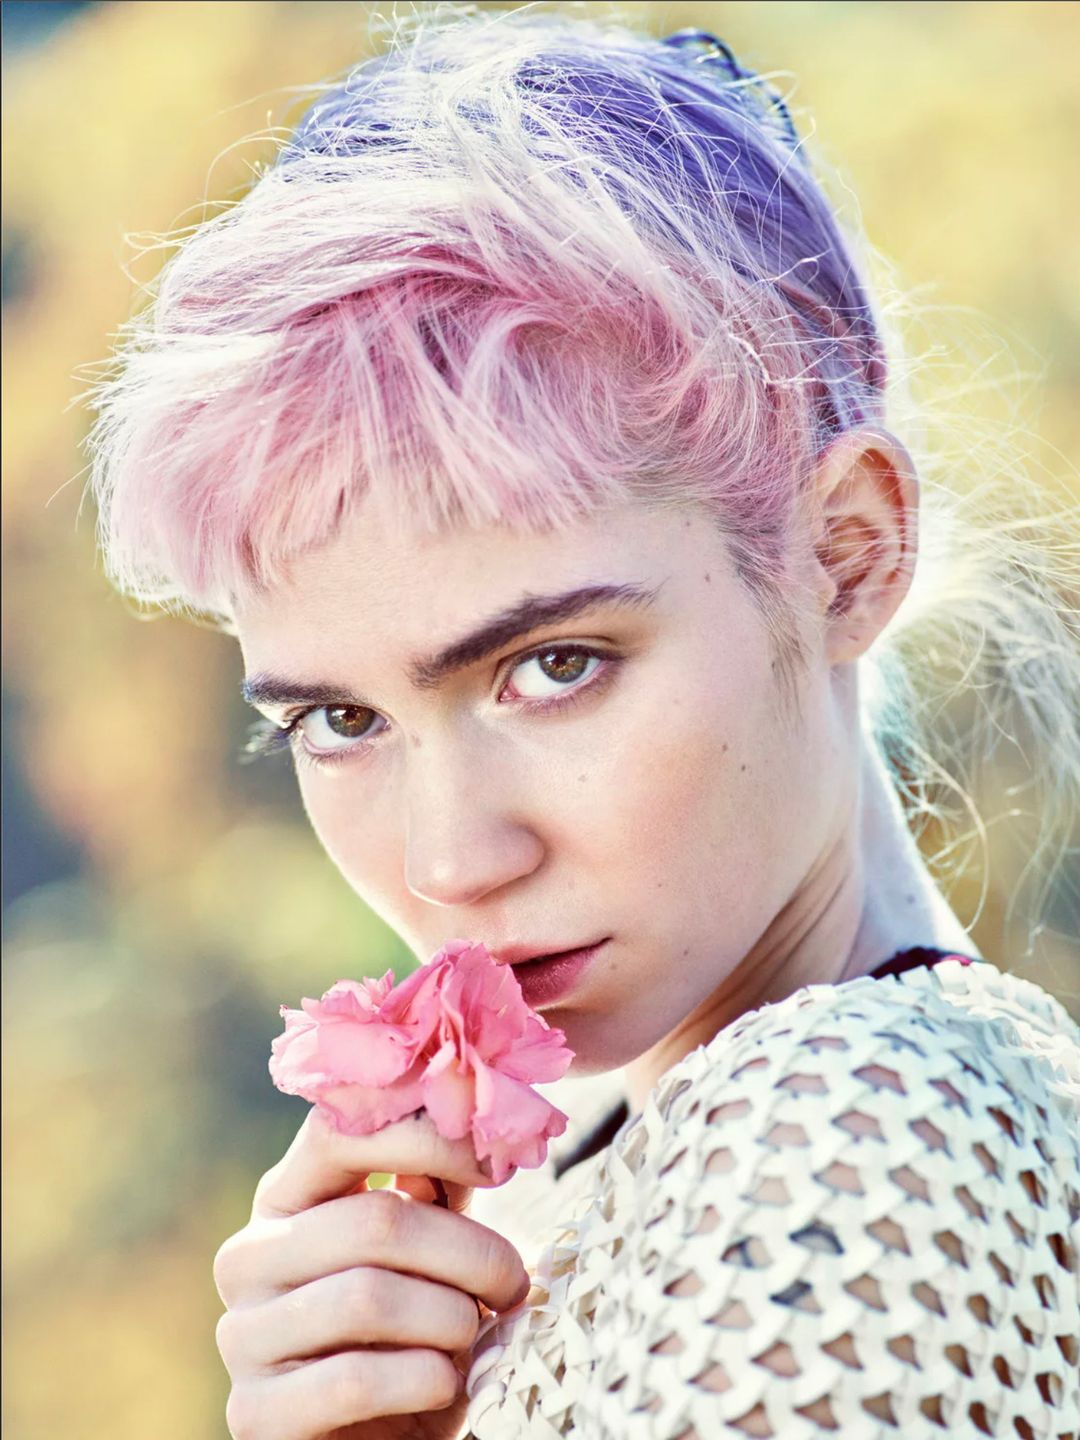 Grimes young age